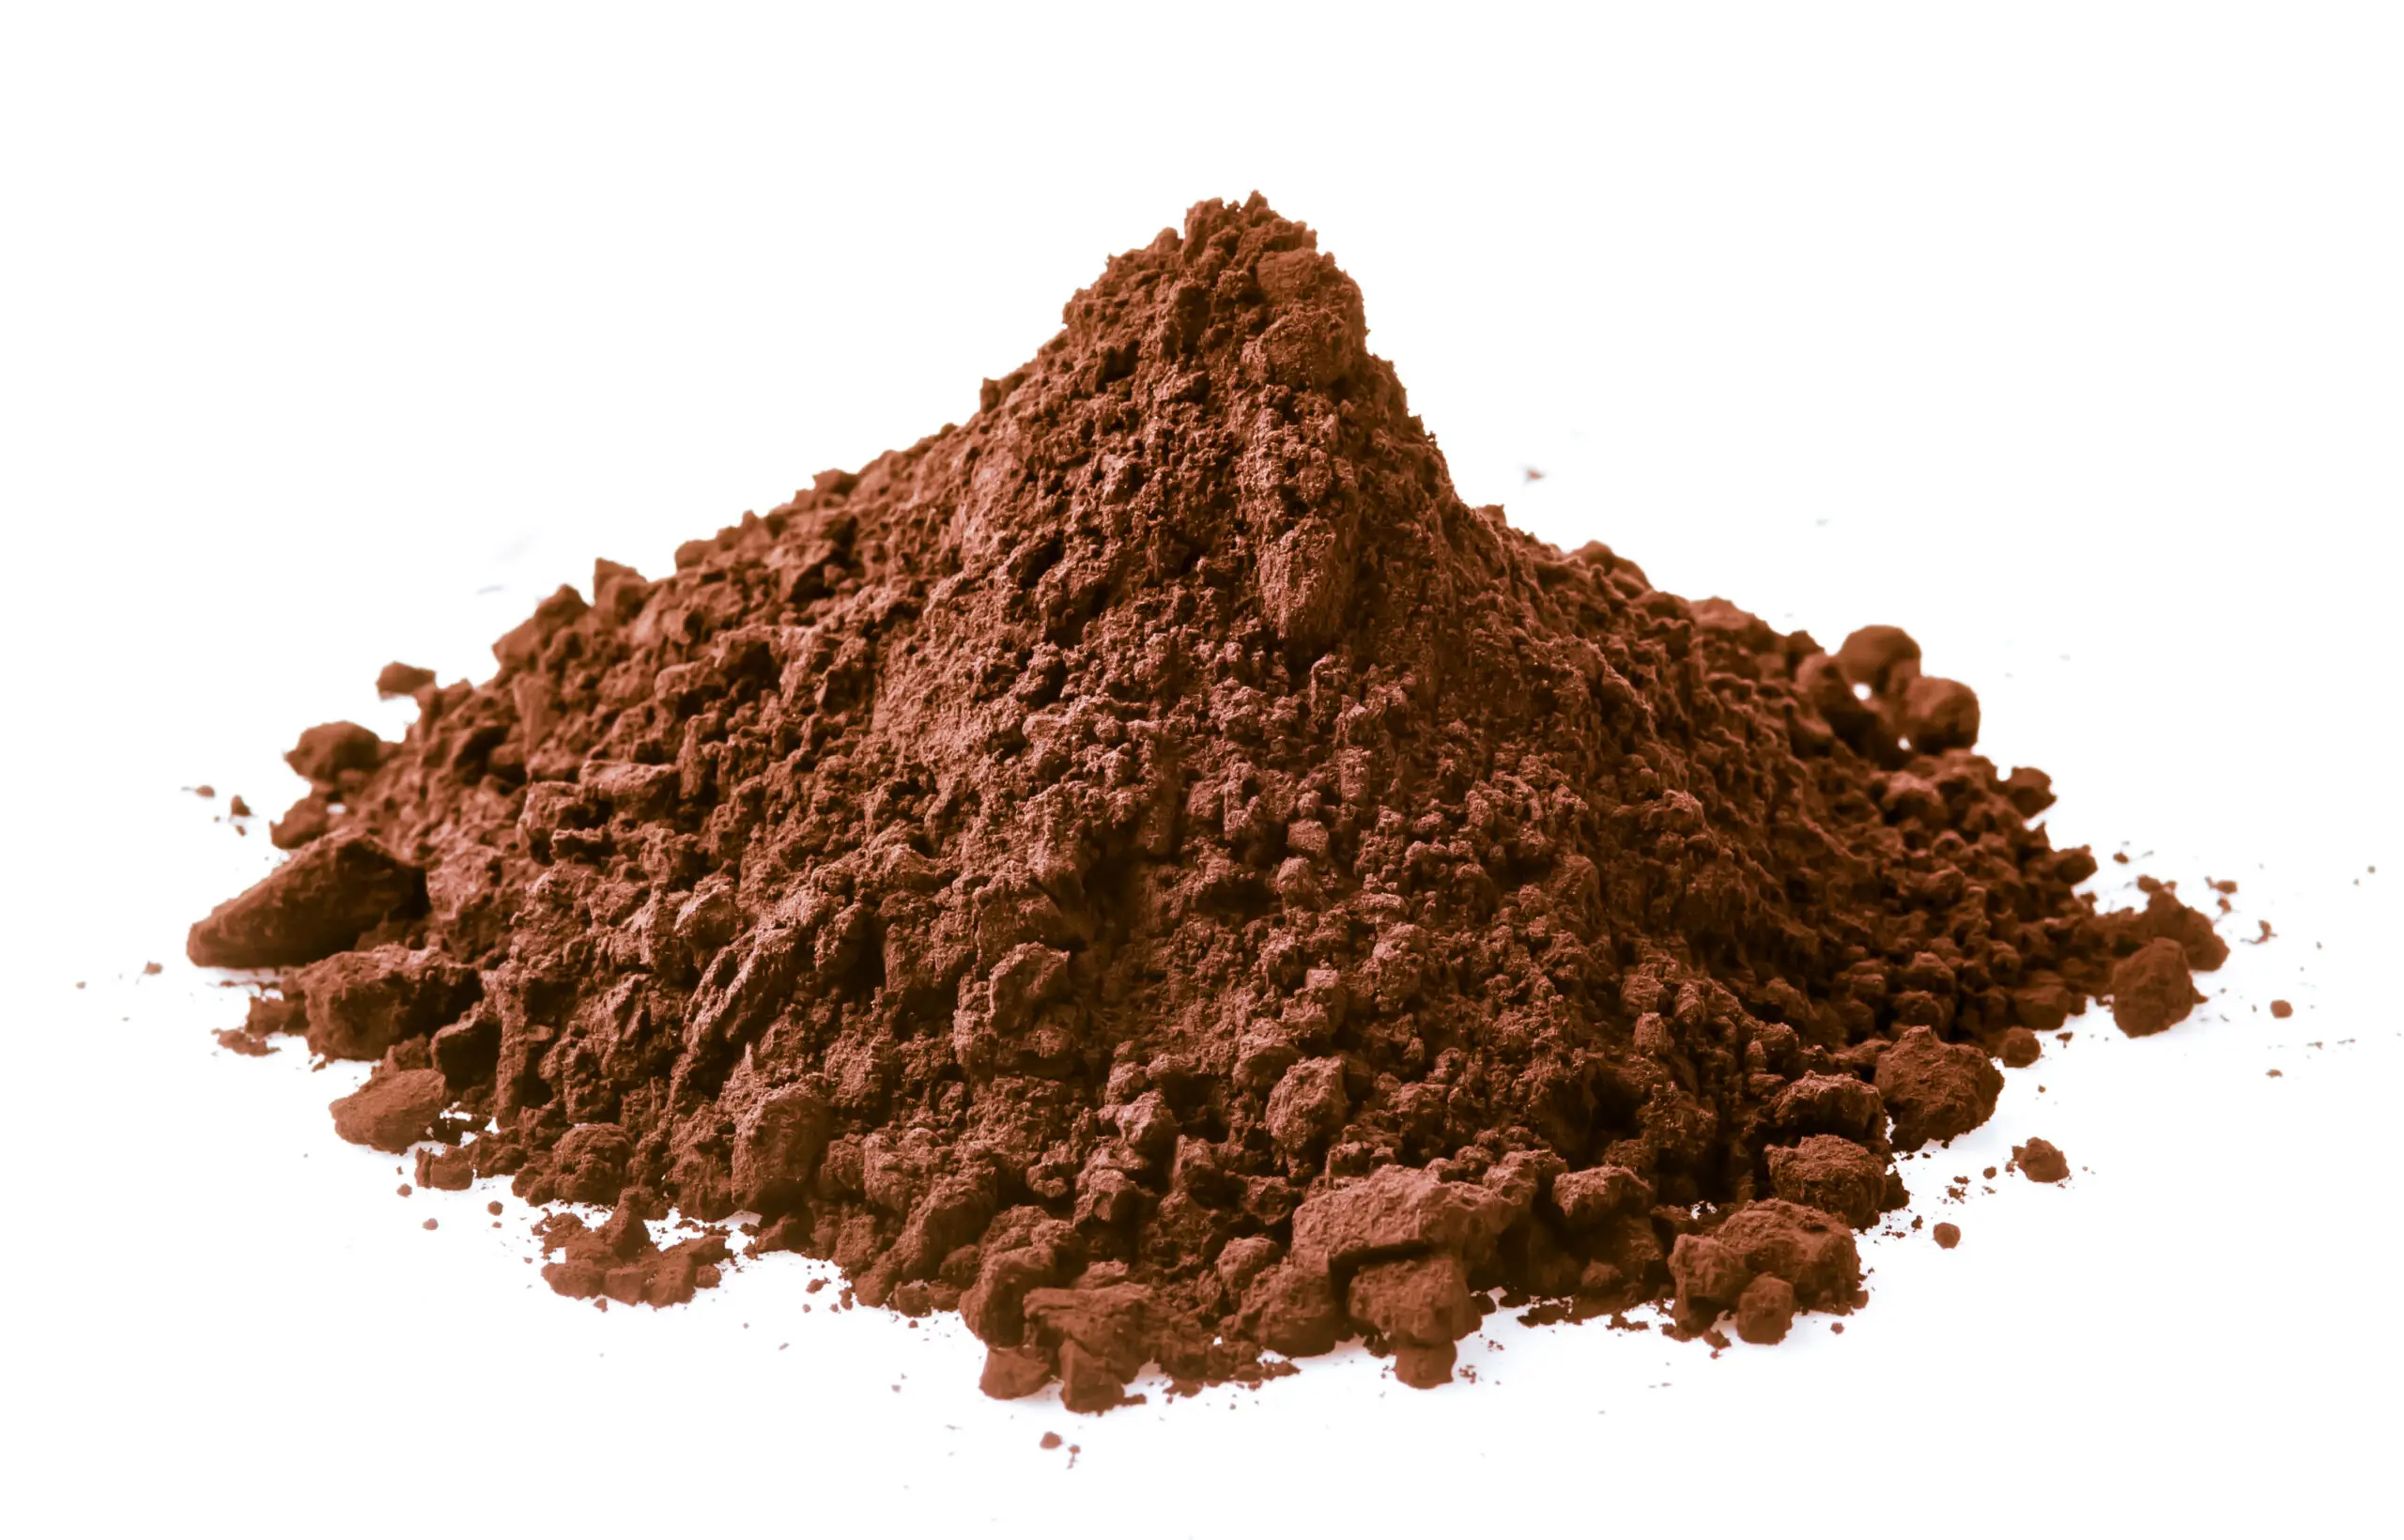 Can Hot Chocolate Be Used as Cocoa Powder